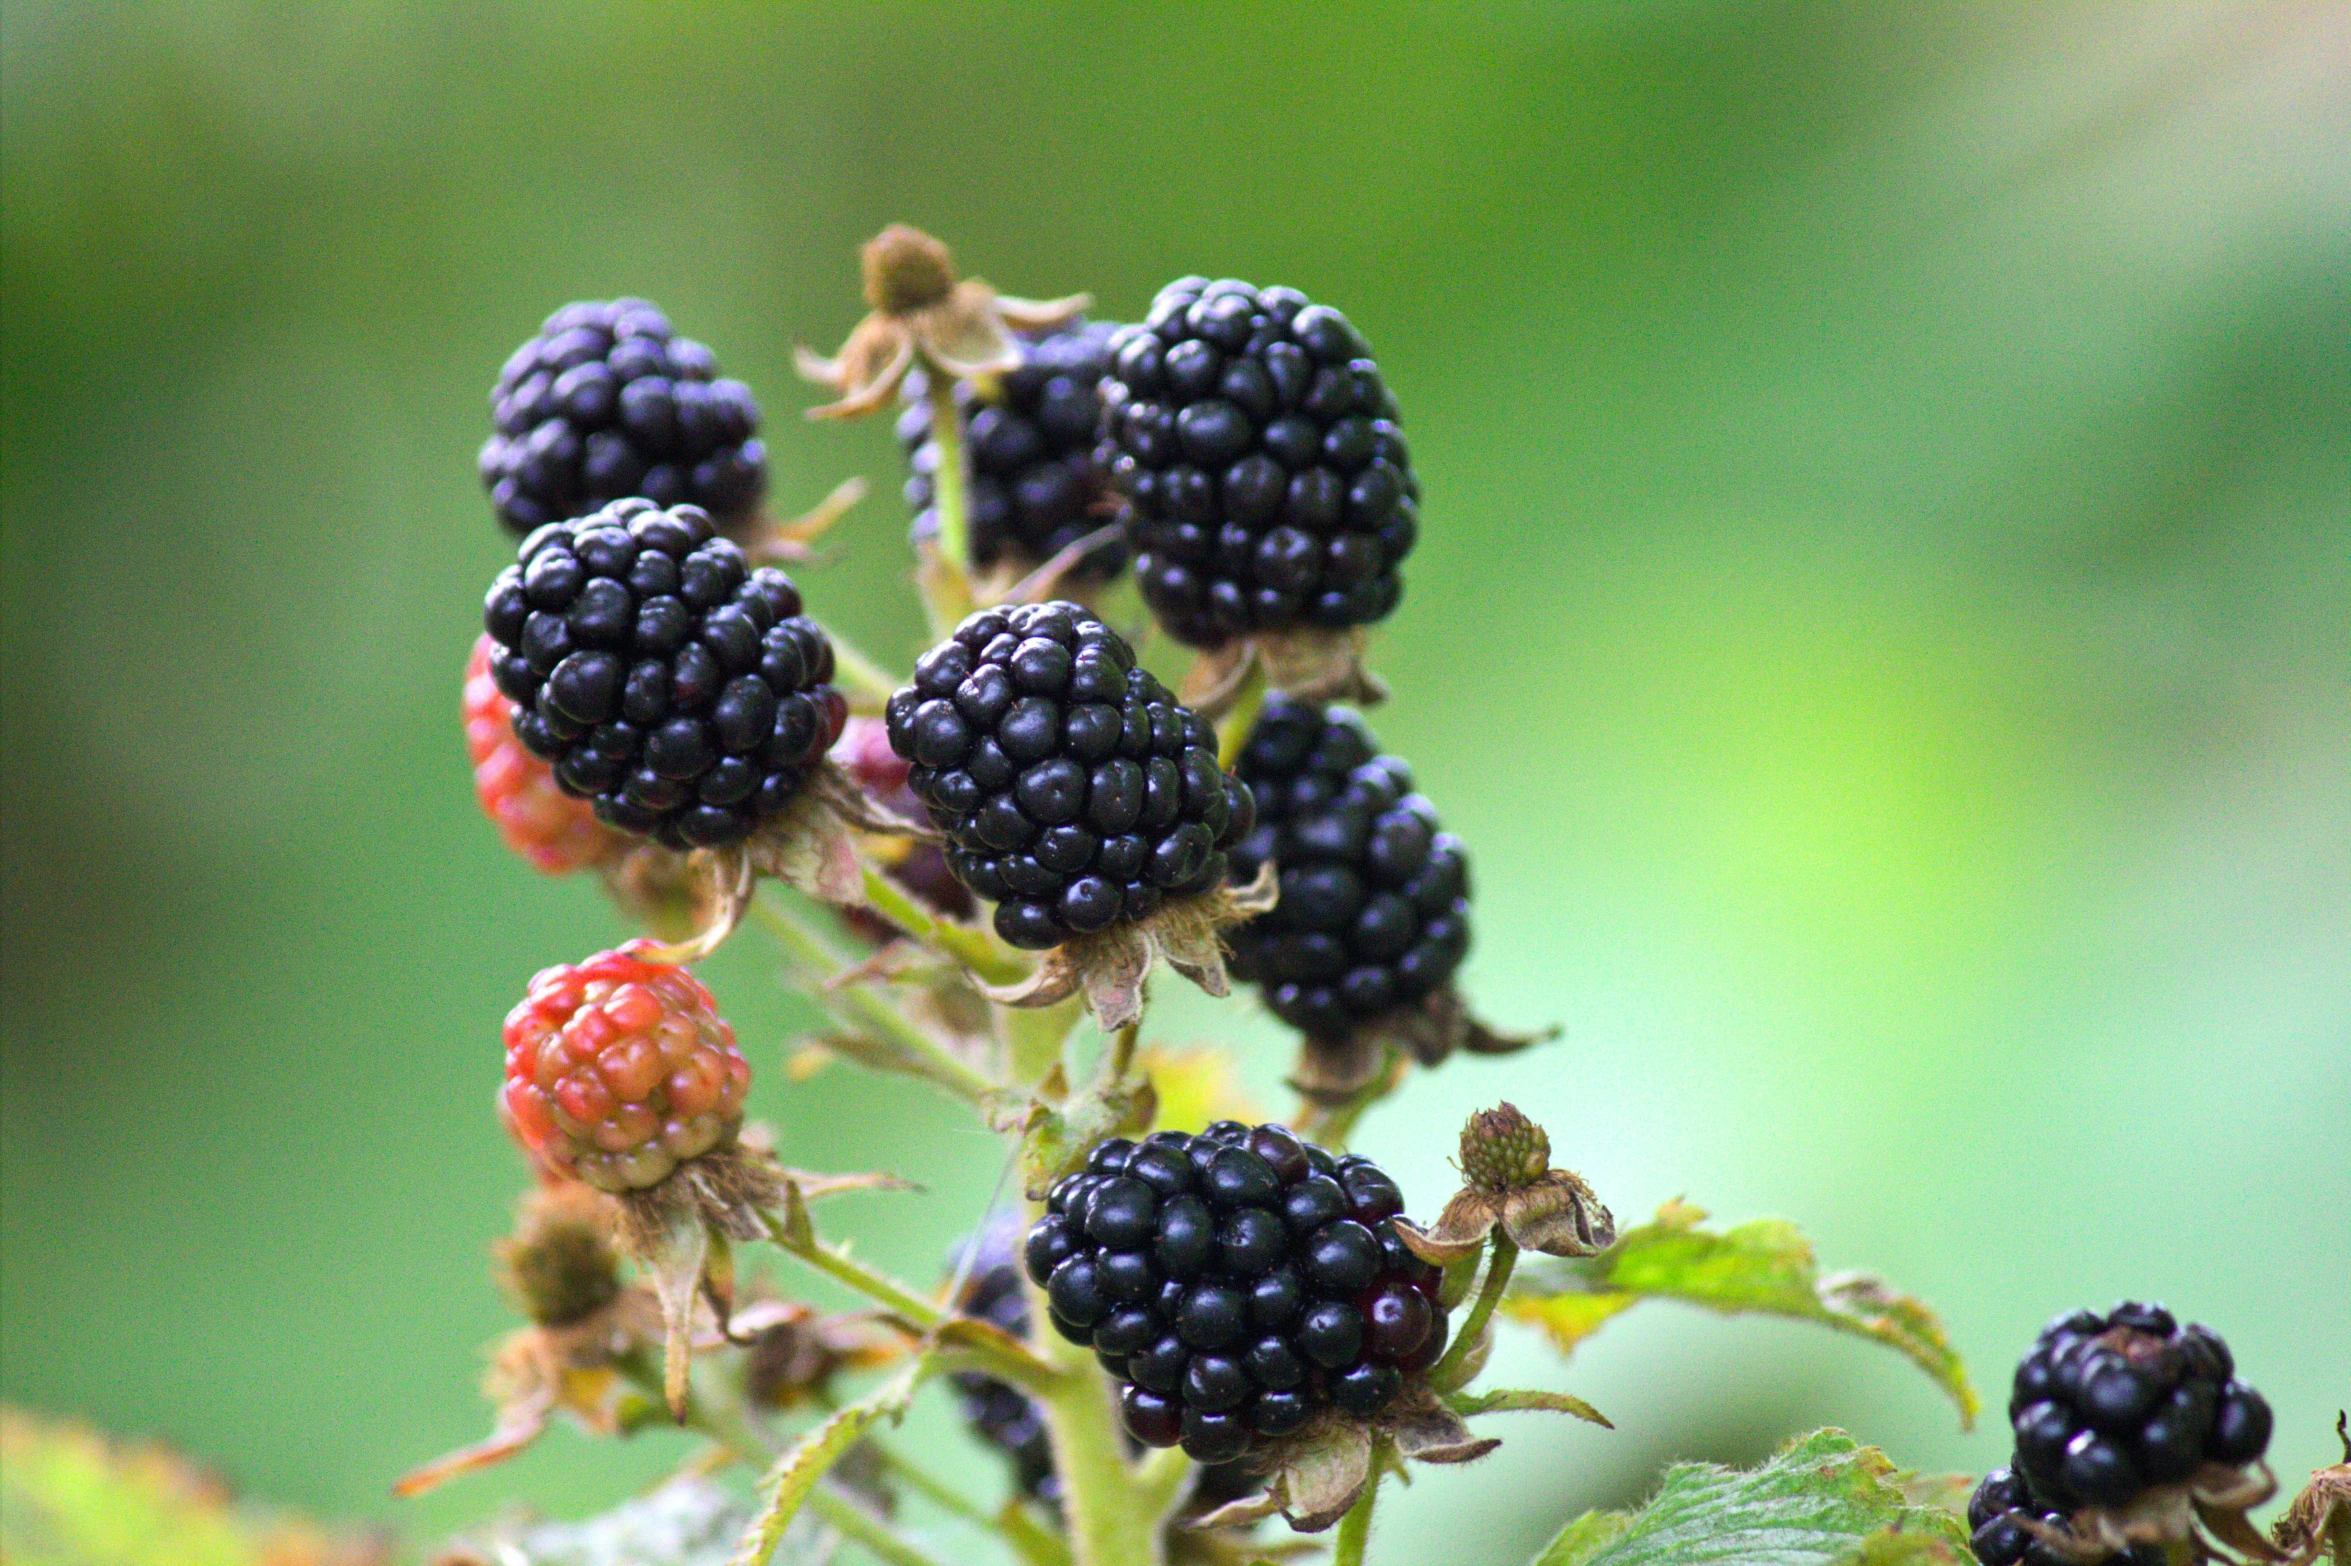 blackberry fruit cluster with a green blurry background